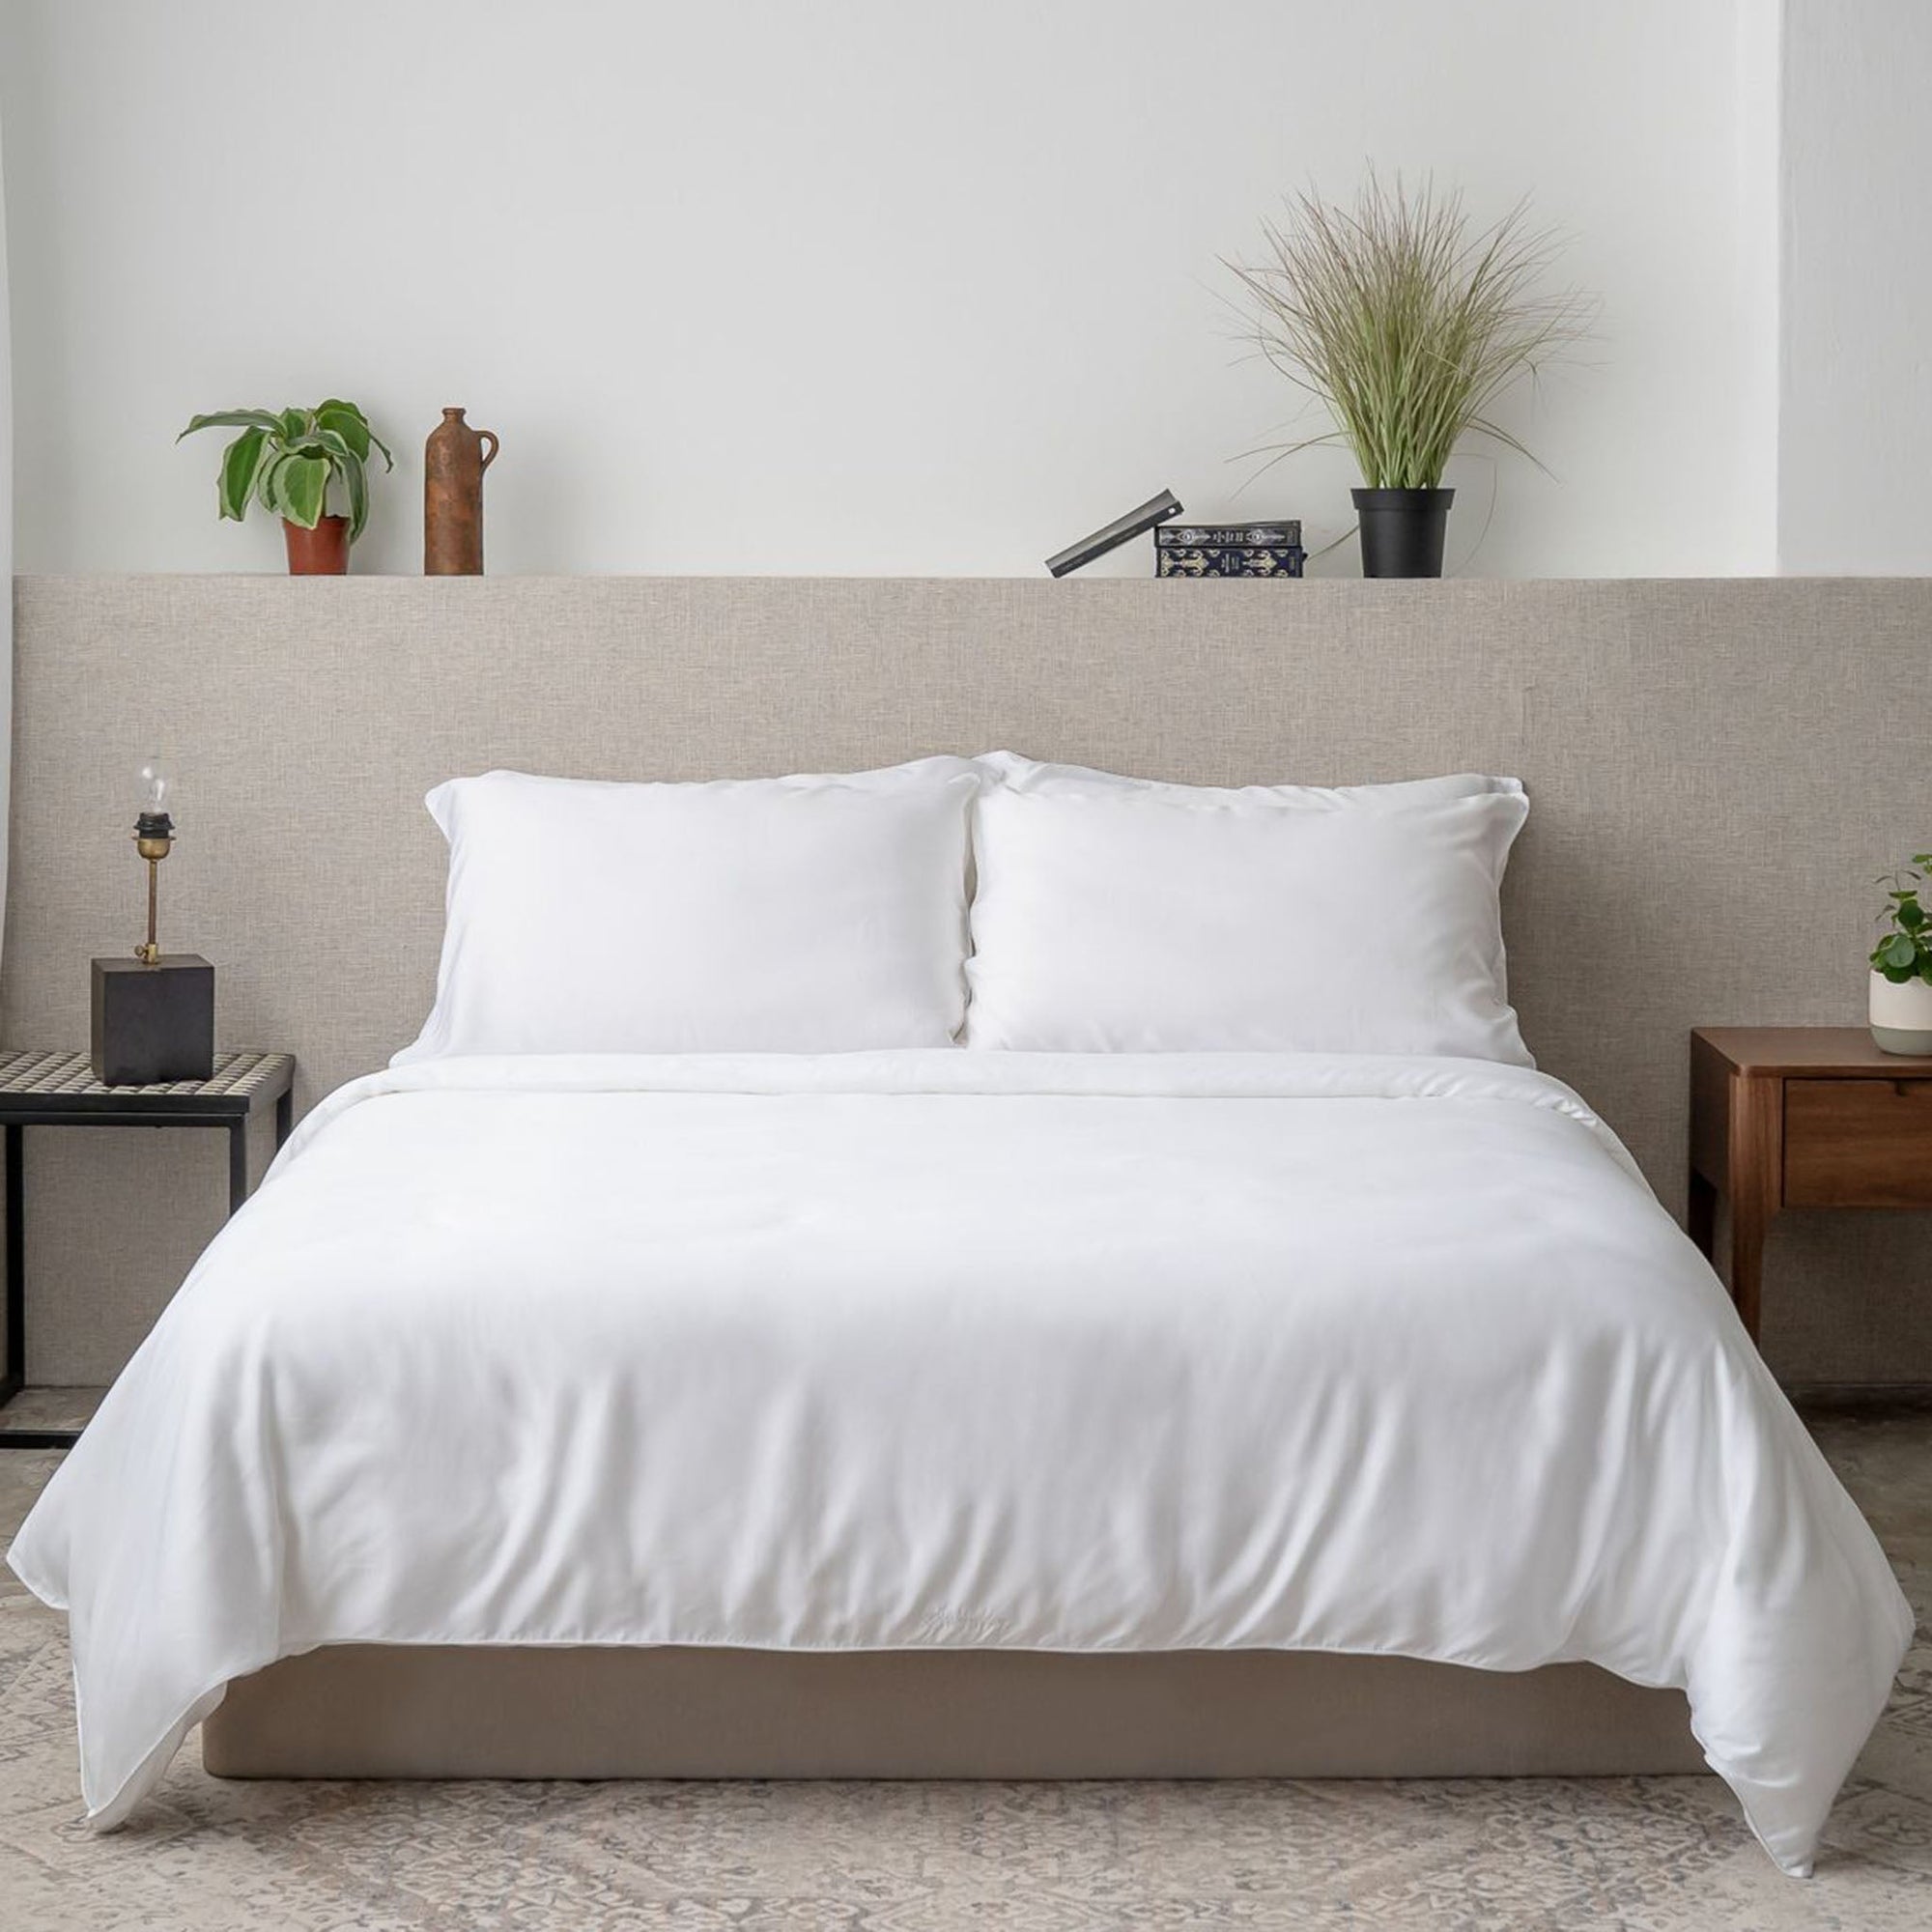 White TENCEL Bed Sheets Classic Set with Tencel Fitted Sheet, Tencel Pillow Case, Tencel Duvet Cover. Buy White Bed Sheets at Weavve Home, Best Bed Sheets Singapore and Luxury Hotel Sheets. 400 High Thread Count Bed Sheet. 